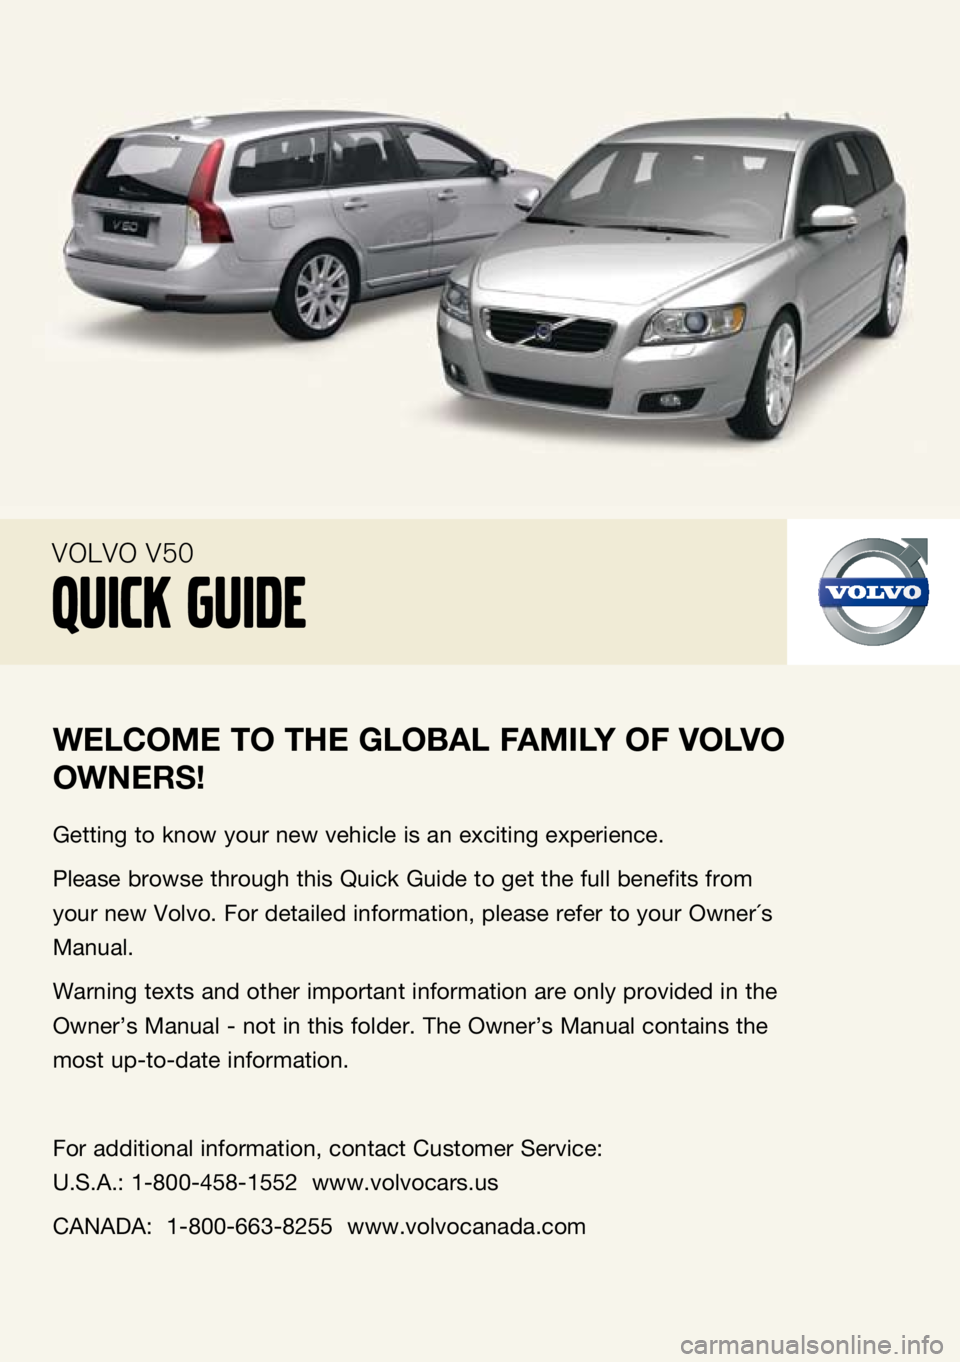 VOLVO V50 2009  Quick Guide 
    
Welc Ome TO T he glObAl FA mIly OF  vO lv O 
OW neRS!
Getting to know your new vehicle is an exciting experience.
Please browse through this Quick Guide to get the full benefits from 
your new V